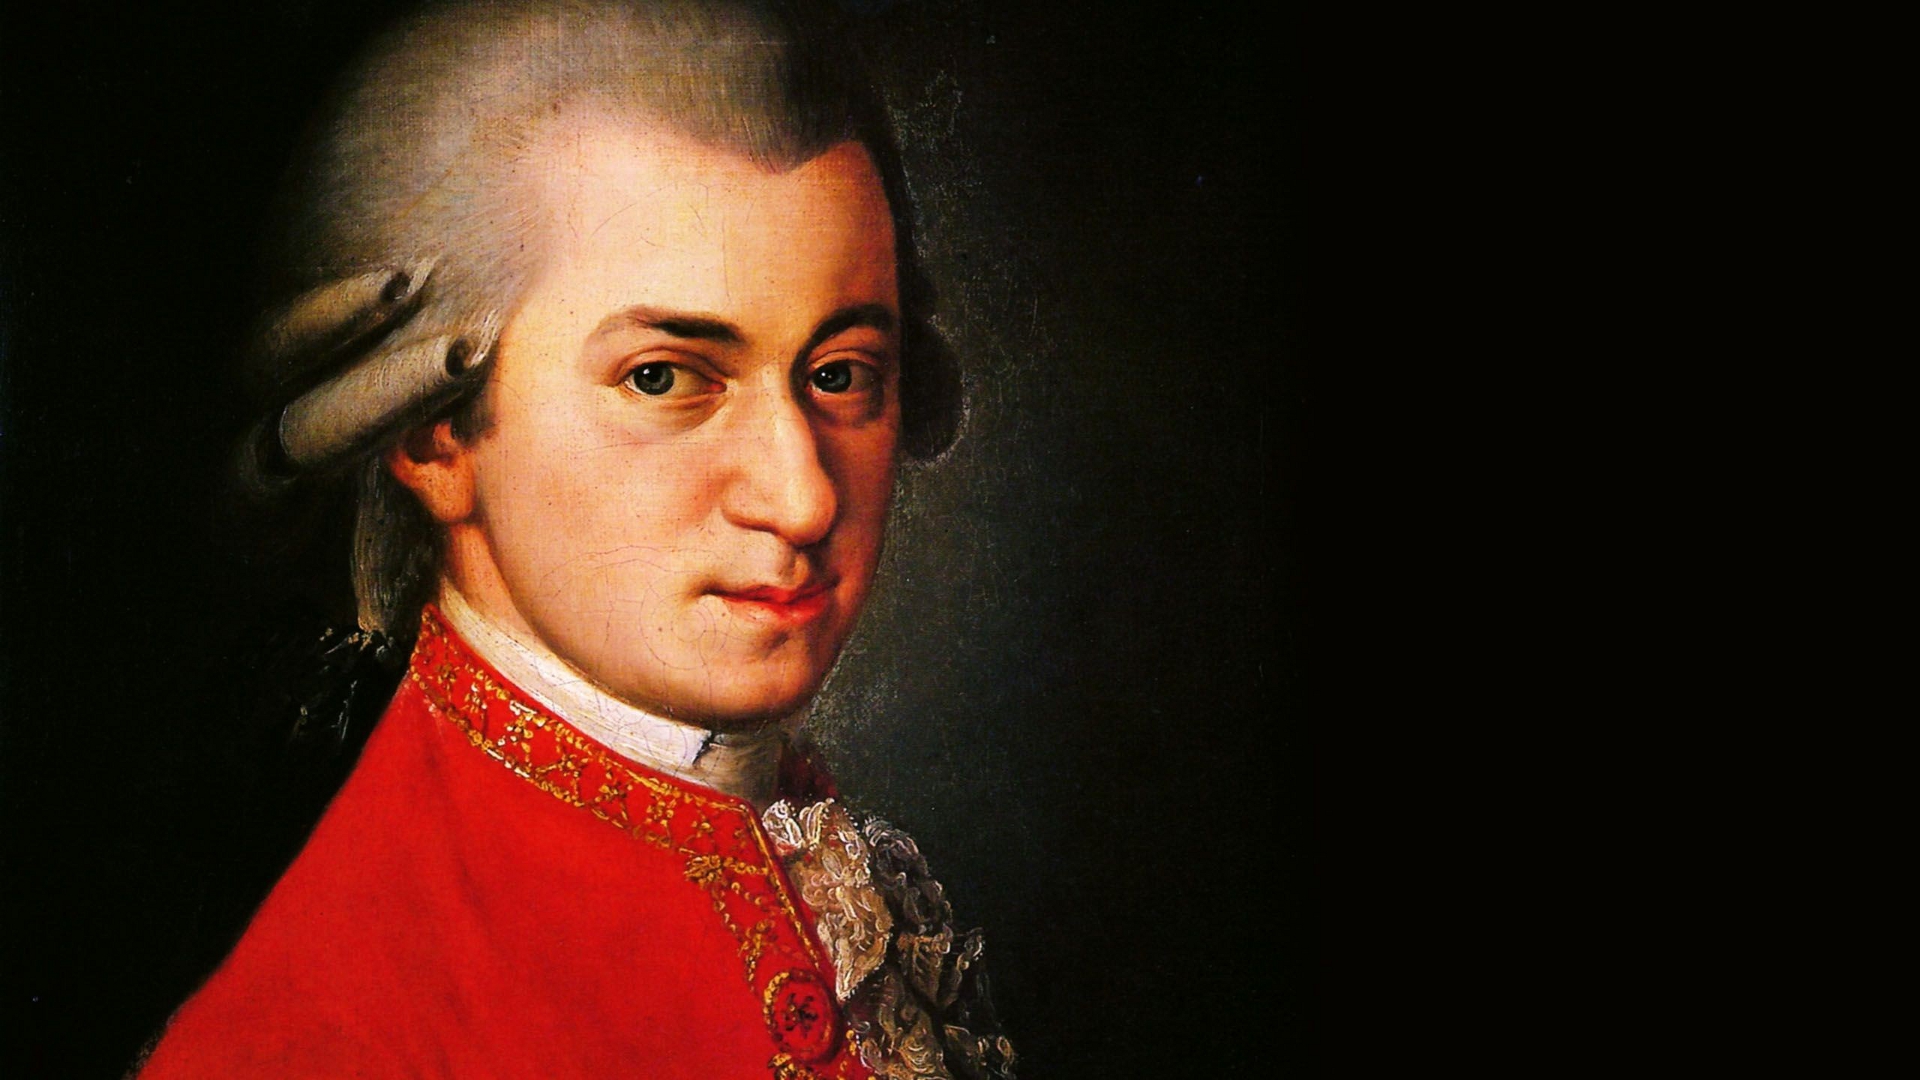 Piano Concert in C Major by W.A.Mozart Kv 467 Pt. 1